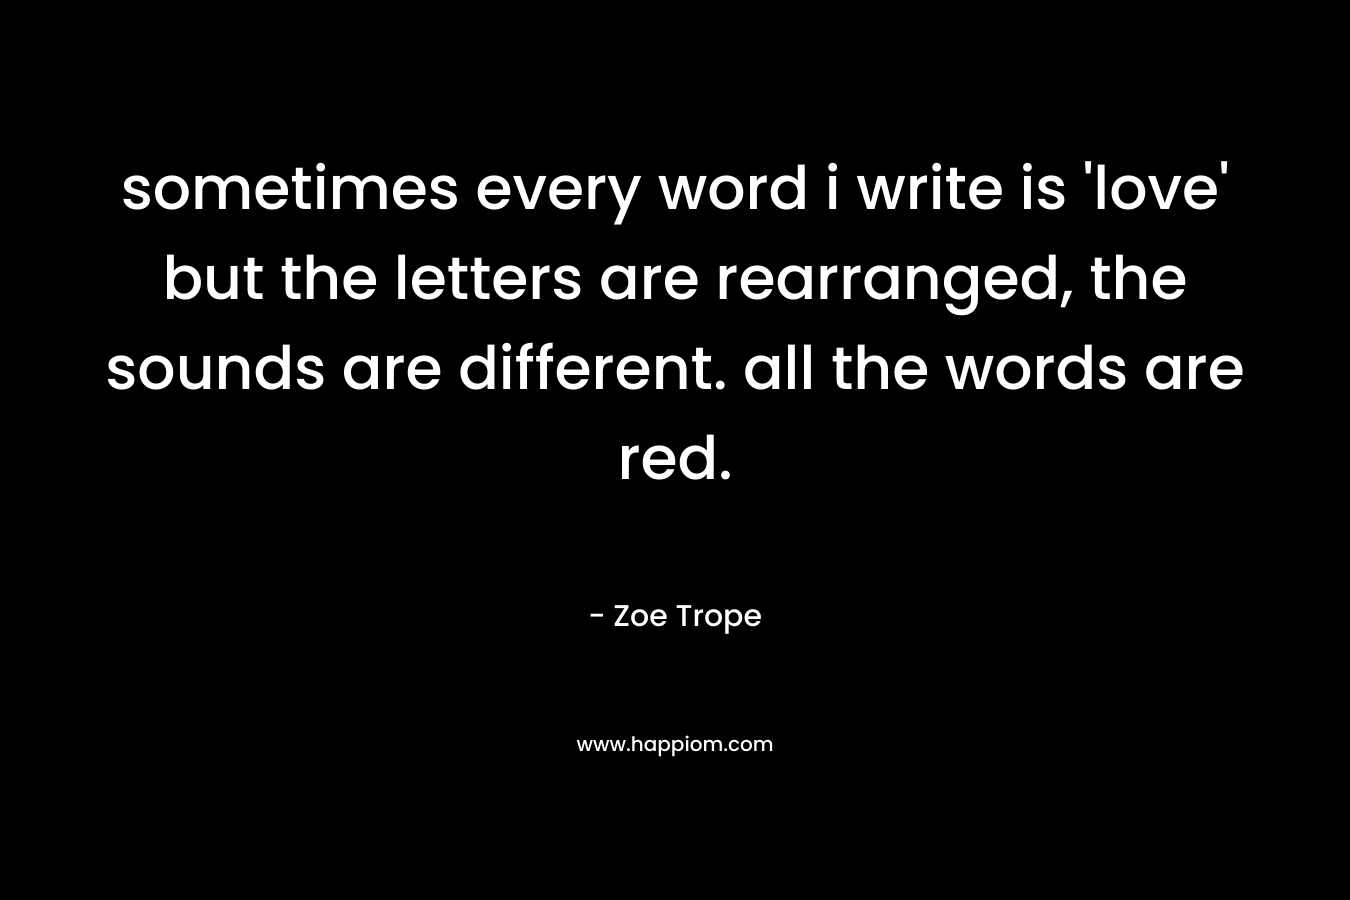 sometimes every word i write is ‘love’ but the letters are rearranged, the sounds are different. all the words are red. – Zoe Trope